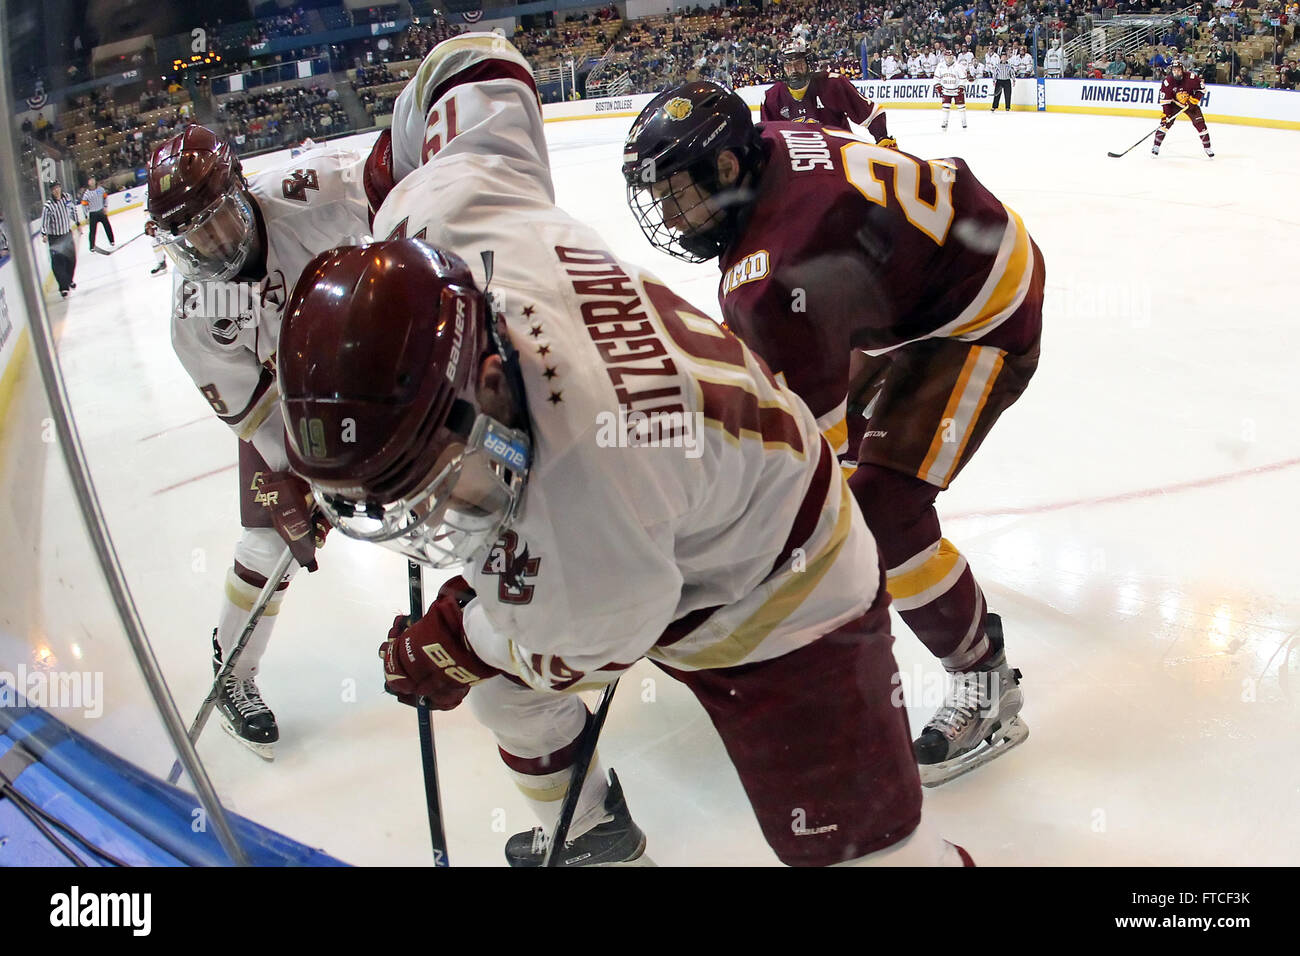 March 26, 2016; Worcester, MA, USA;Boston College Eagles forward Ryan Fitzgerald (19), Boston College Eagles forward Colin White (18) and Minnesota-Duluth Bulldogs defenseman Carson Soucy (21) in action during the NCAA Northeast Regional Finals hockey game between Minnesota-Duluth and Boston College Eagles at the DCU Center. Boston College defeated Minnesota-Duluth 3-2. Anthony Nesmith/Cal Sport Media Stock Photo